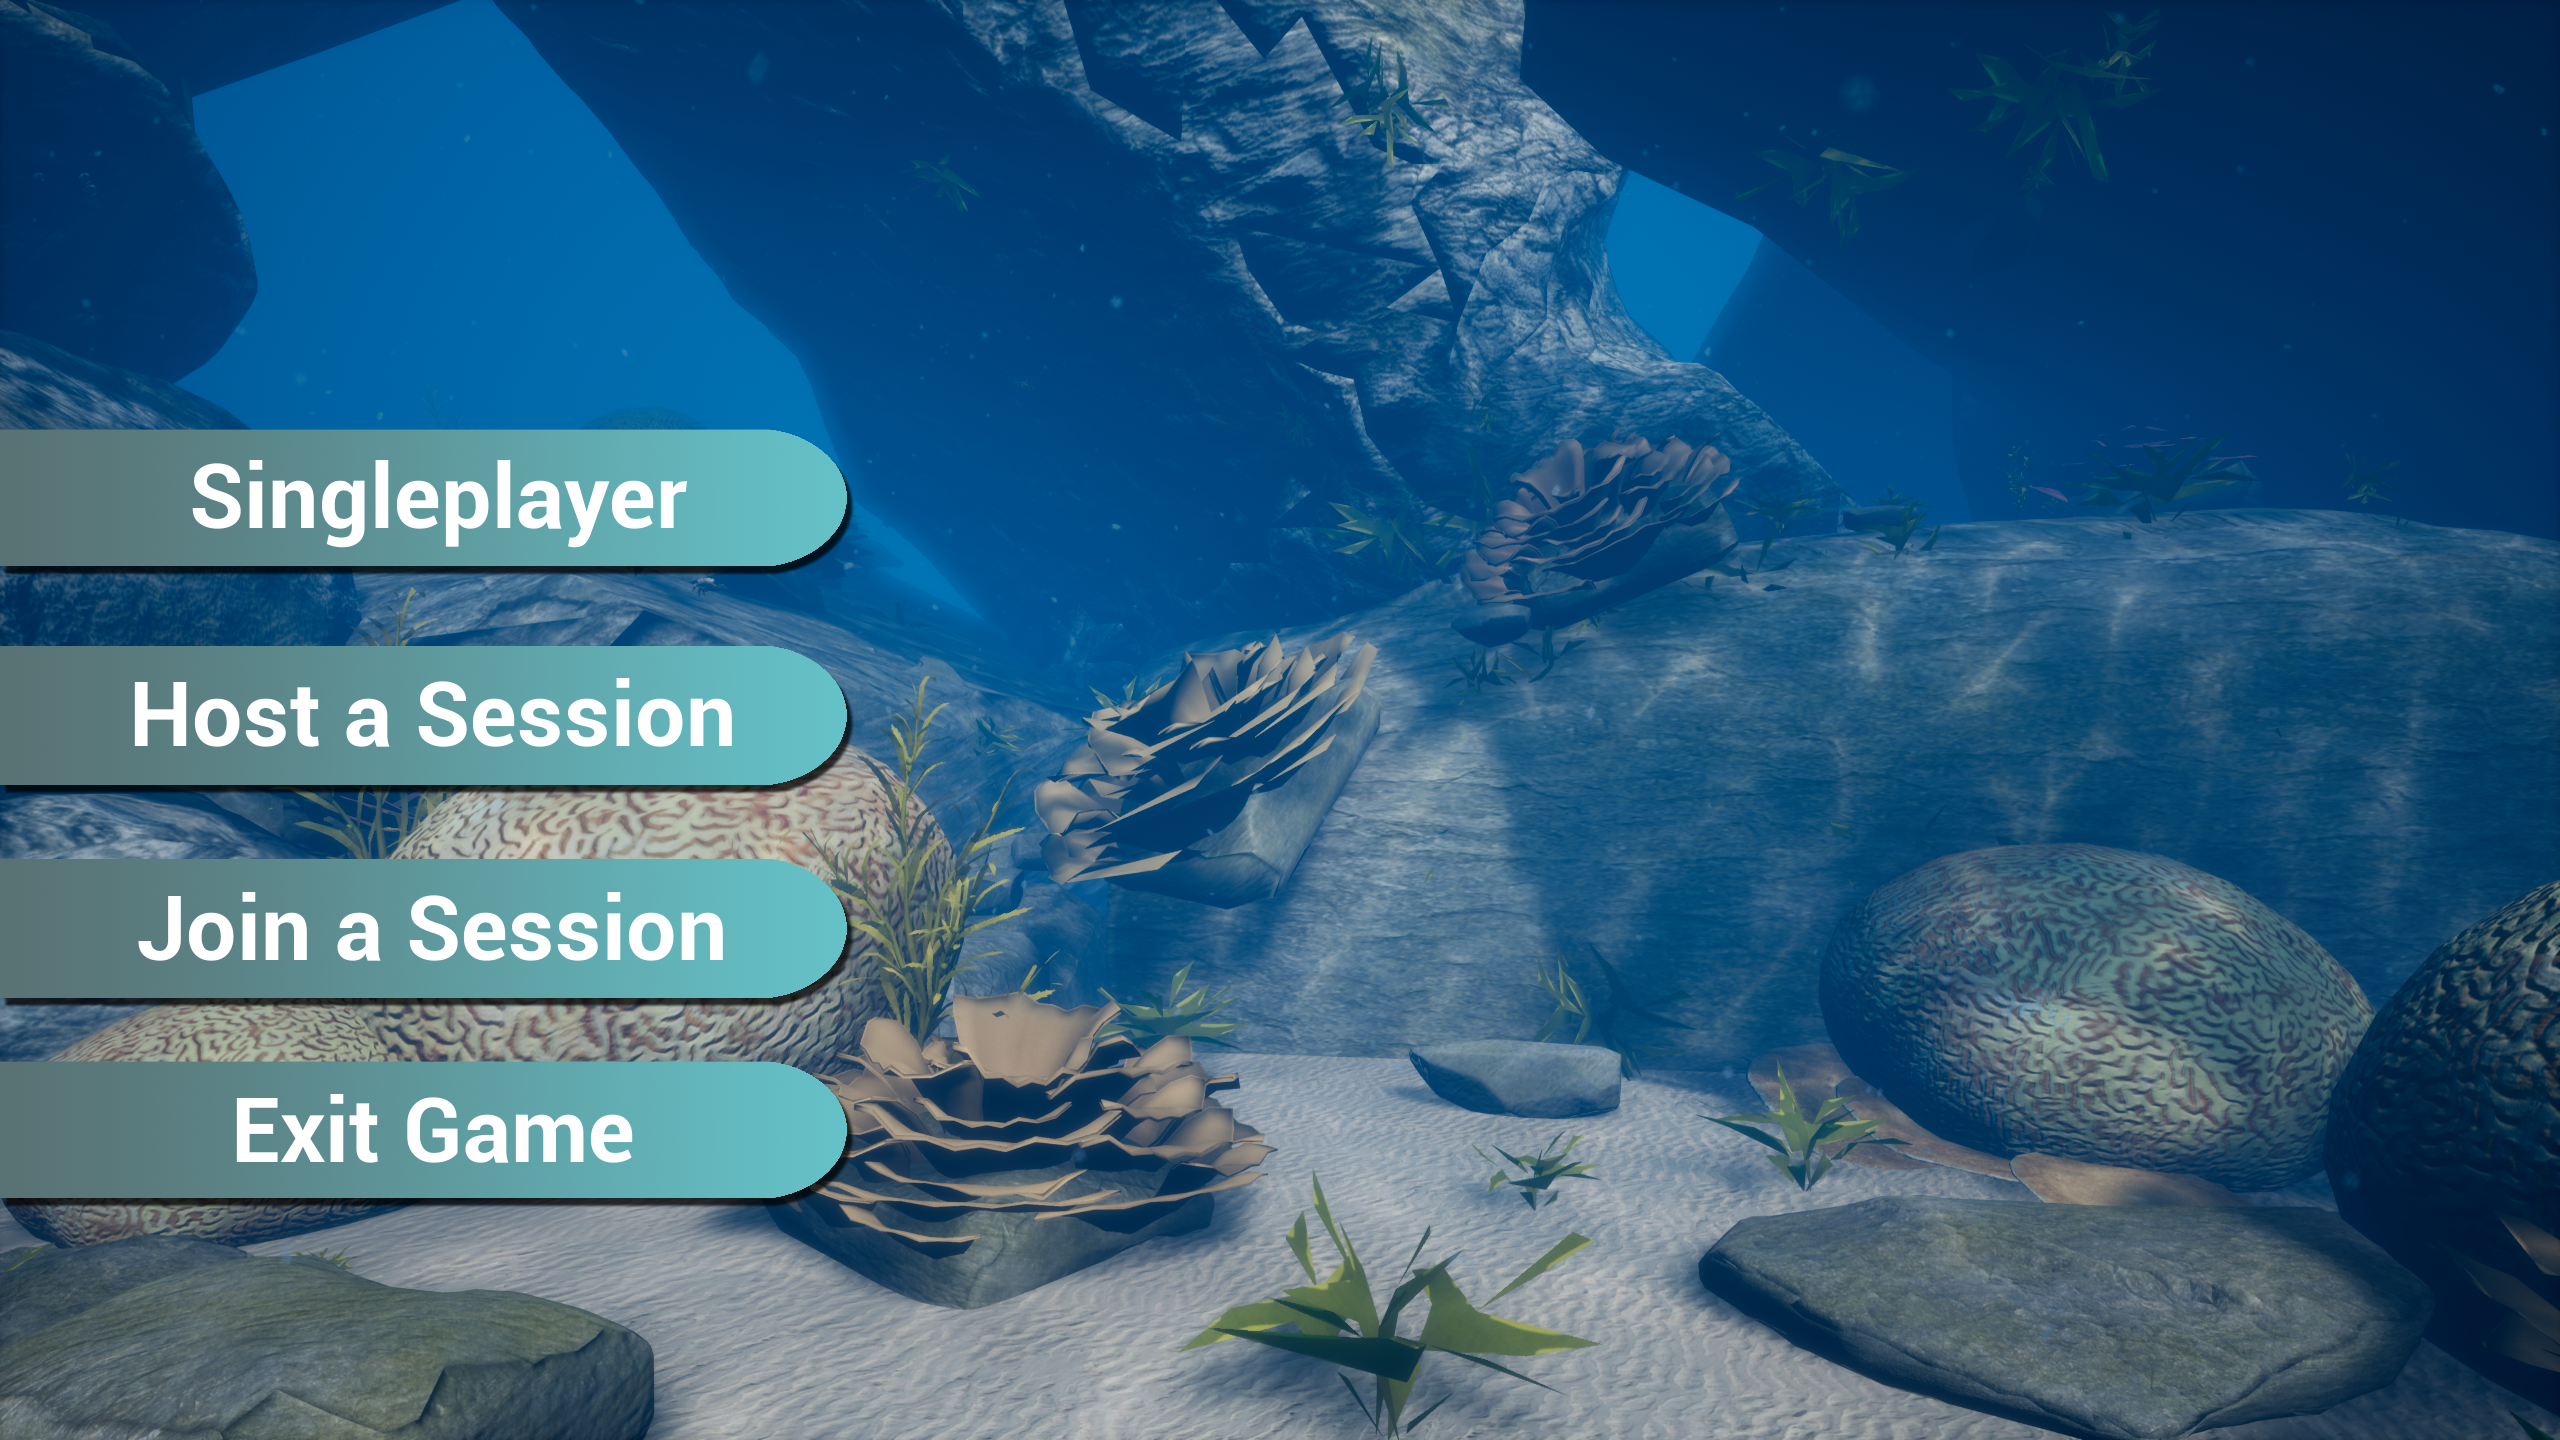 The Main Menu of the simulation allowing to play Singleplayer and Multiplayer sessions.